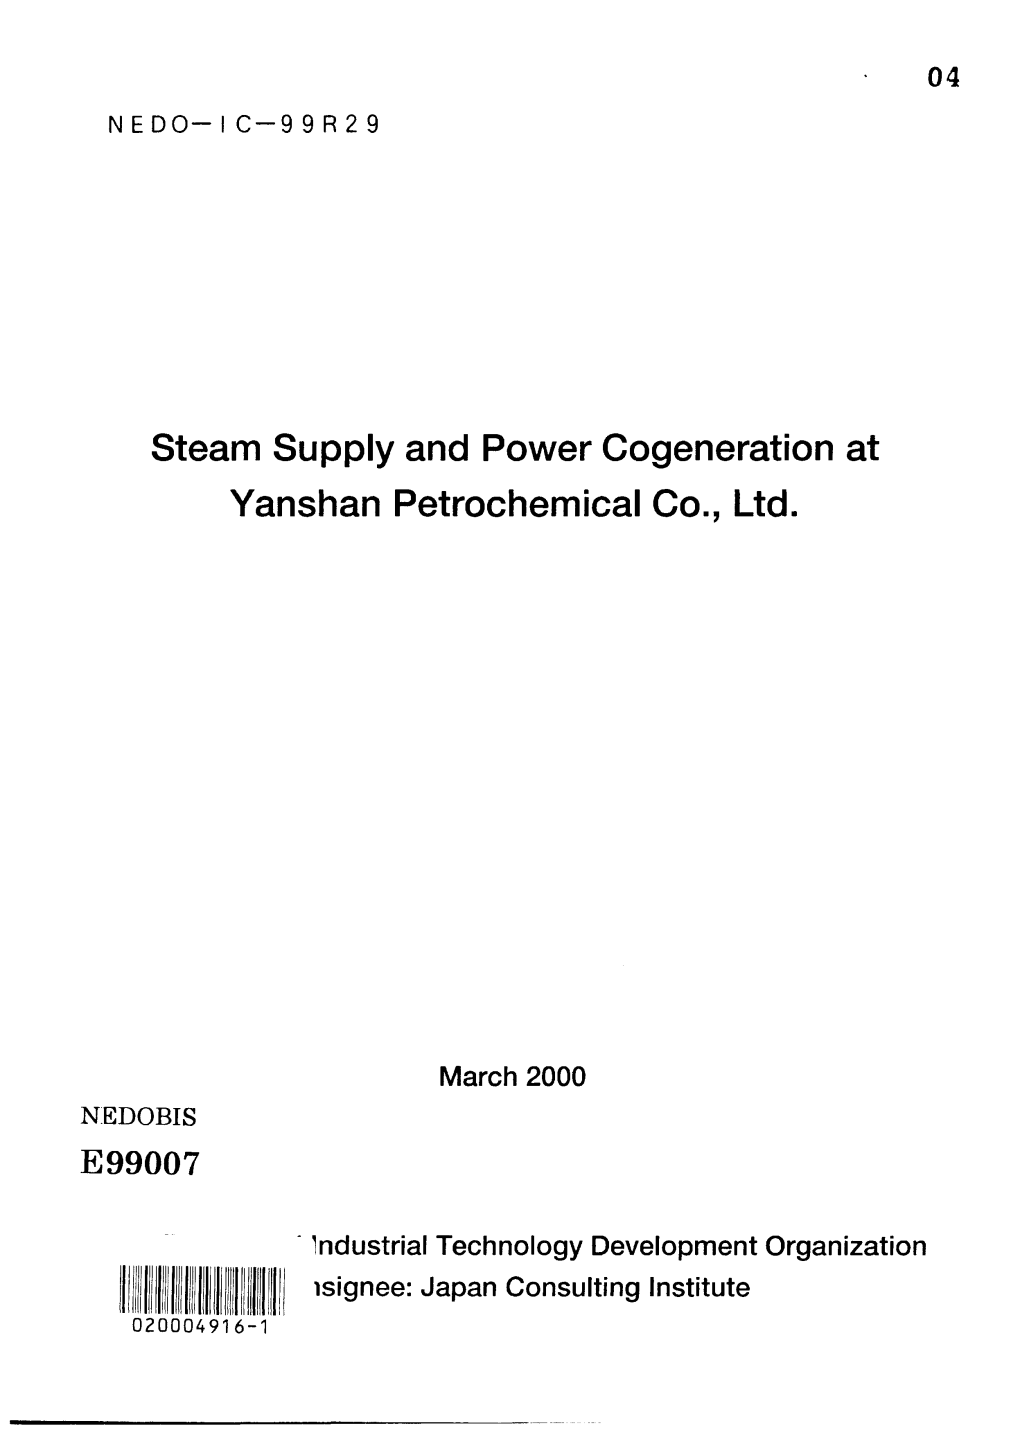 Steam Supply and Power Cogeneration at Yanshan Petrochemical Co., Ltd